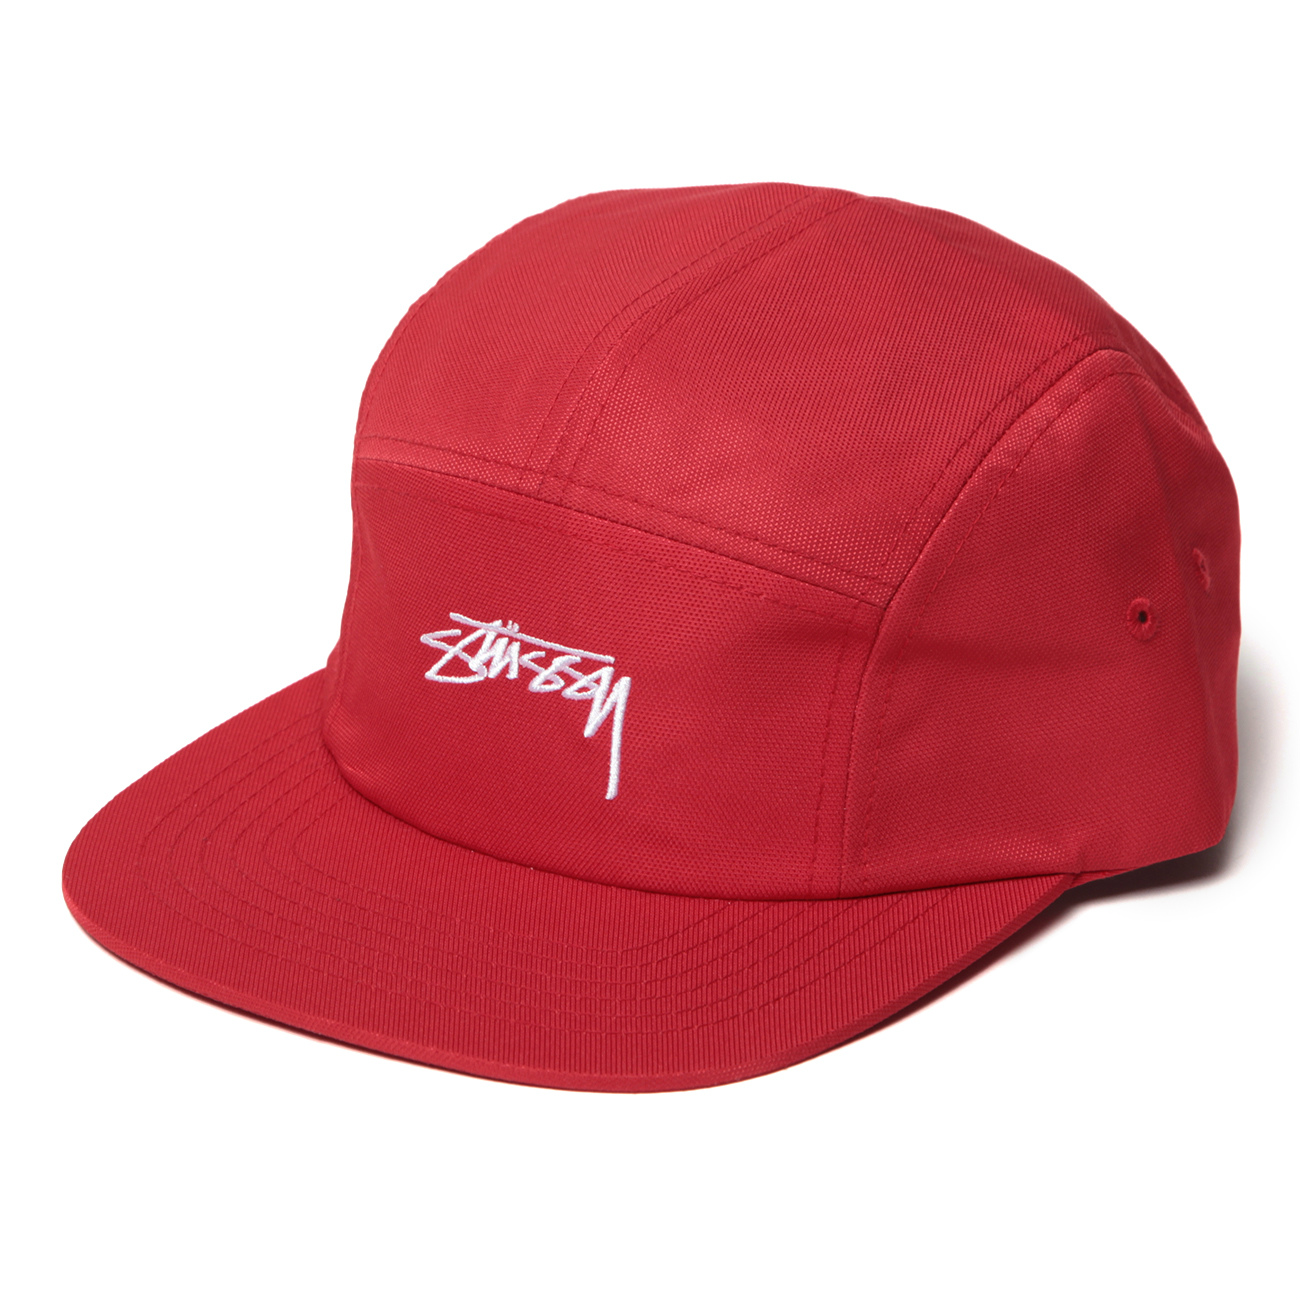 Smooth Stock Camp Cap - Red